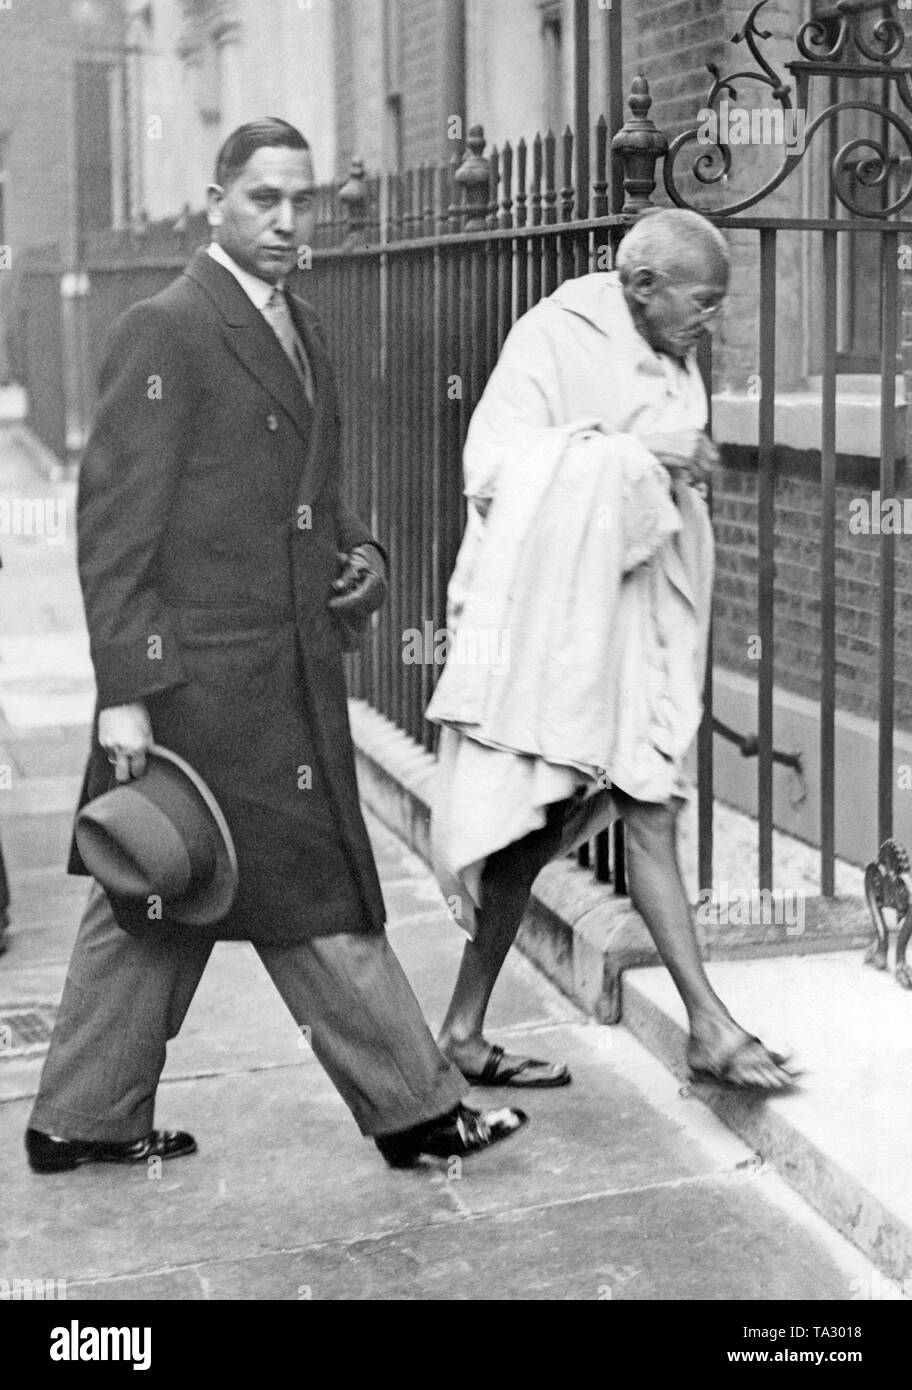 The leader of the Indian nationalist movement Mahatma Gandhi on the way to a meeting with British Prime Minister Ramsay MacDonald at Downing Street 10. The reason for the meeting is the failed Indian Round Table Conference. Stock Photo